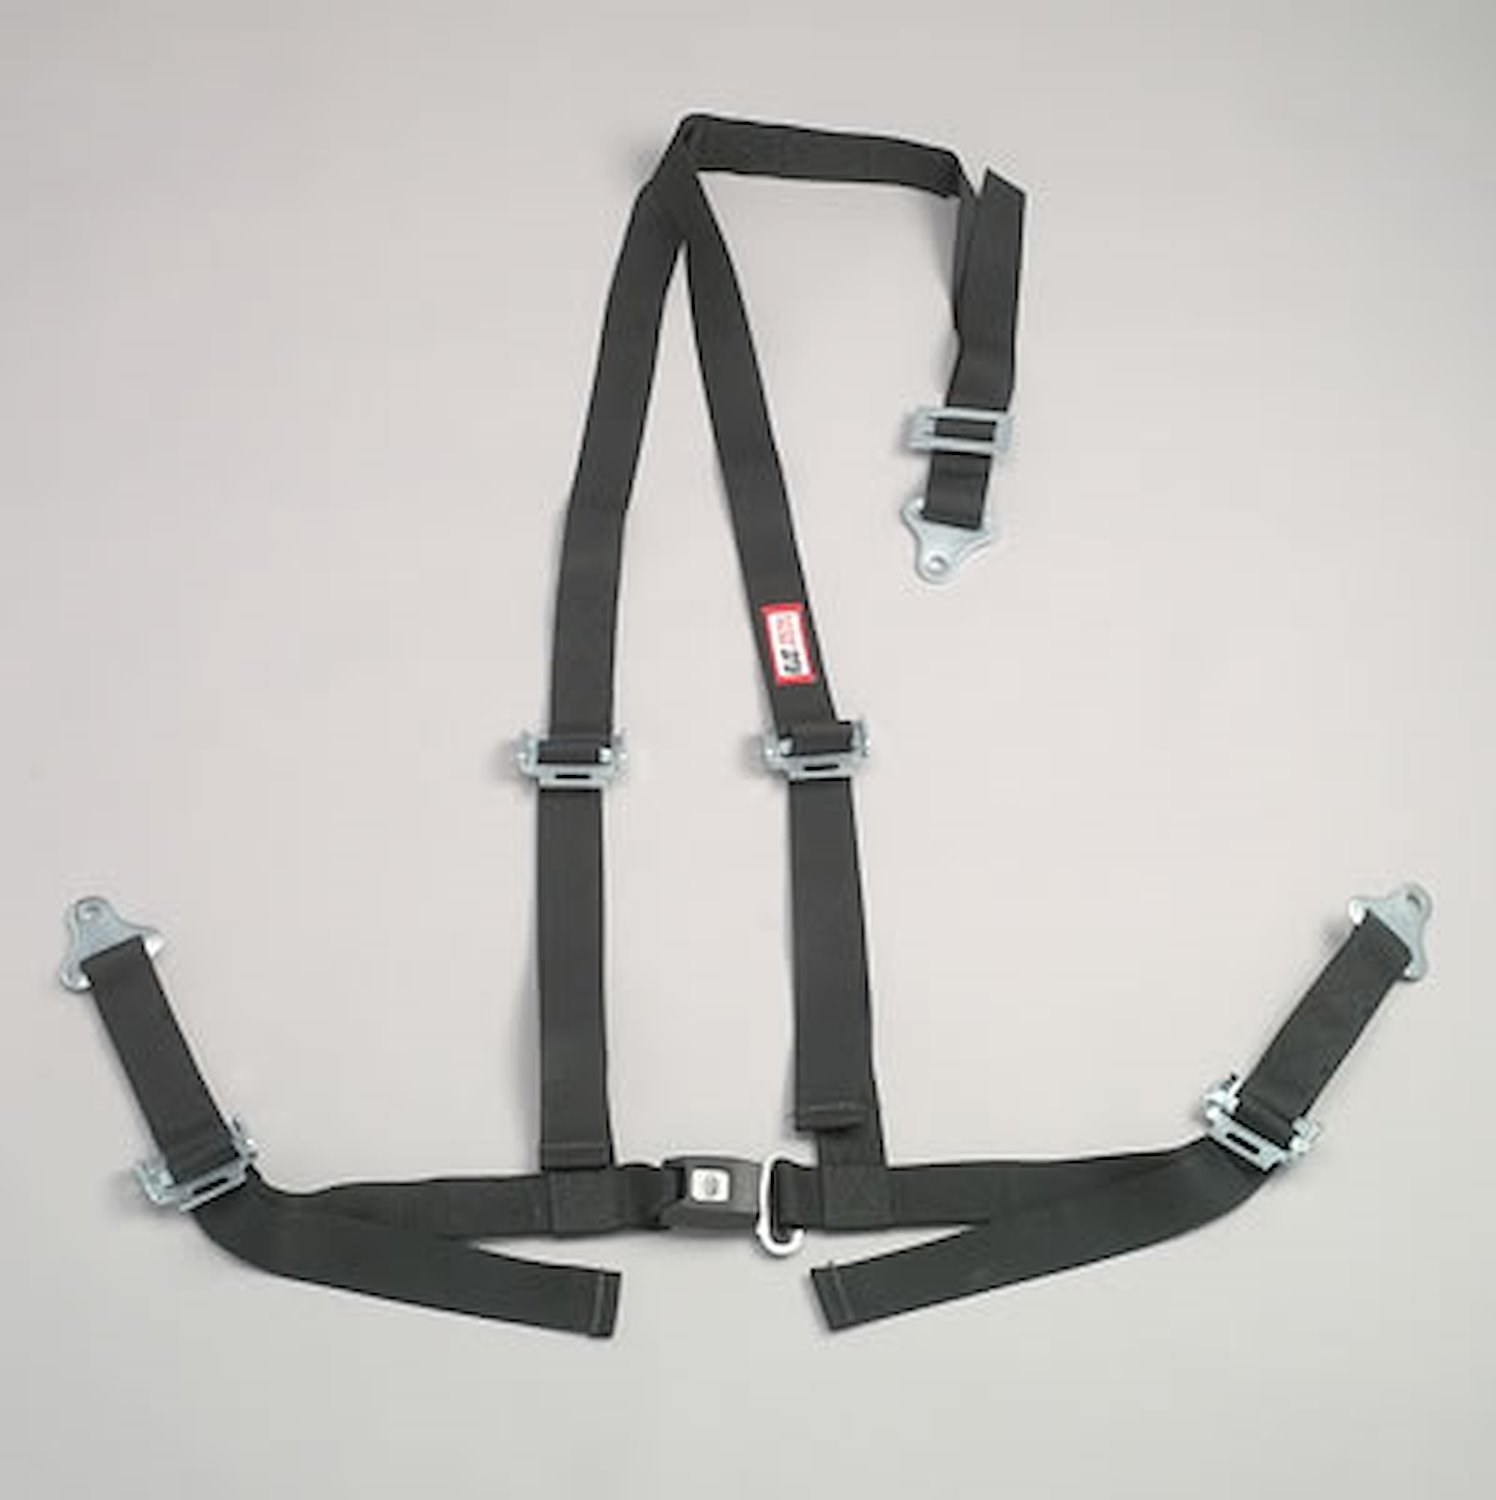 NON-SFI B&T HARNESS 2 PULL DOWN Lap Belt 2 S. H. V ROLL BAR Mount ALL WRAP ENDS w/STERNUM STRAP GRAY